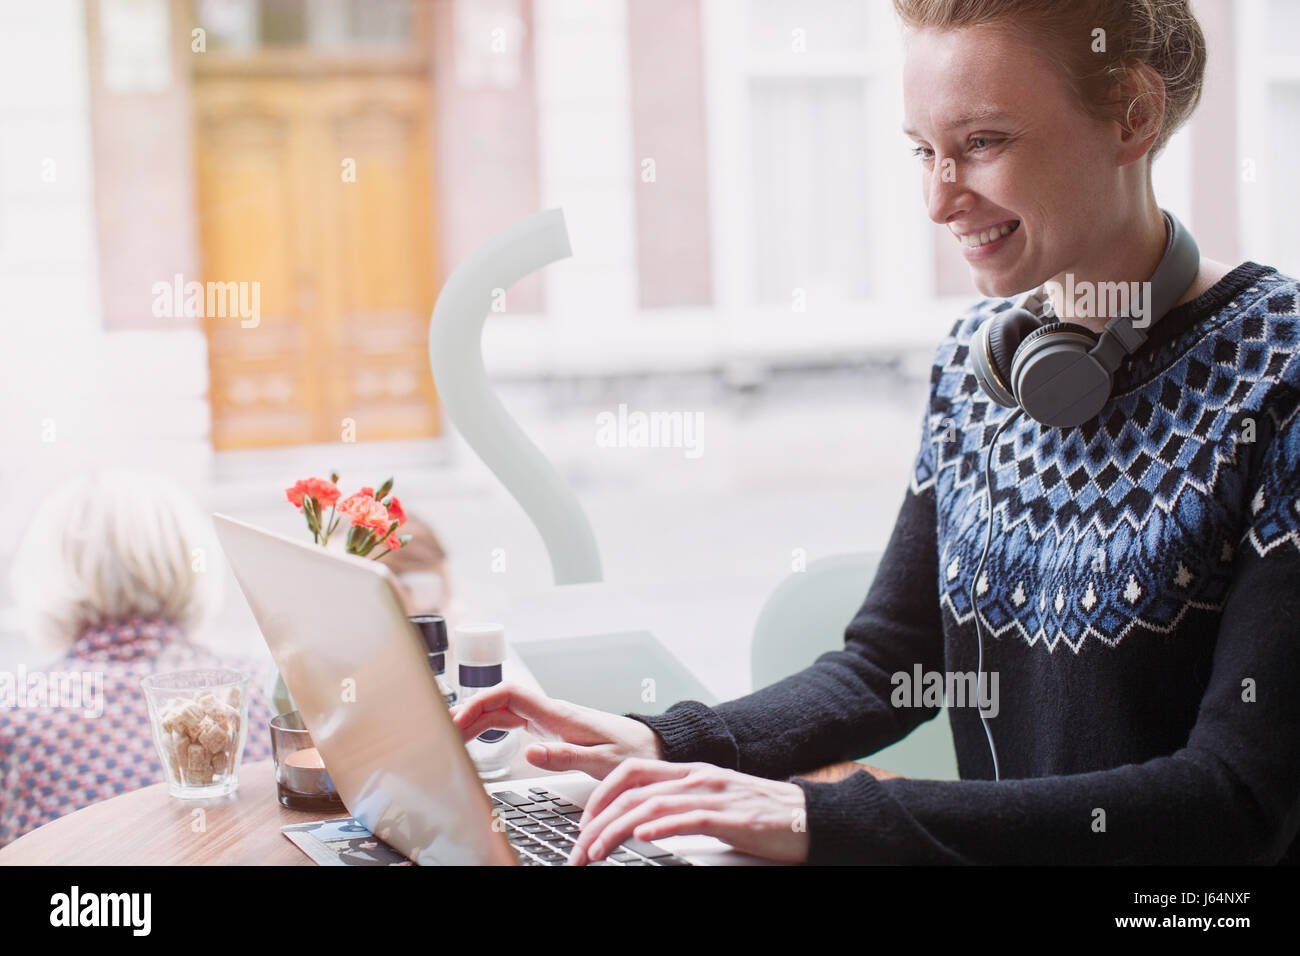 Smiling young woman with headphones using laptop in sidewalk cafe window Stock Photo